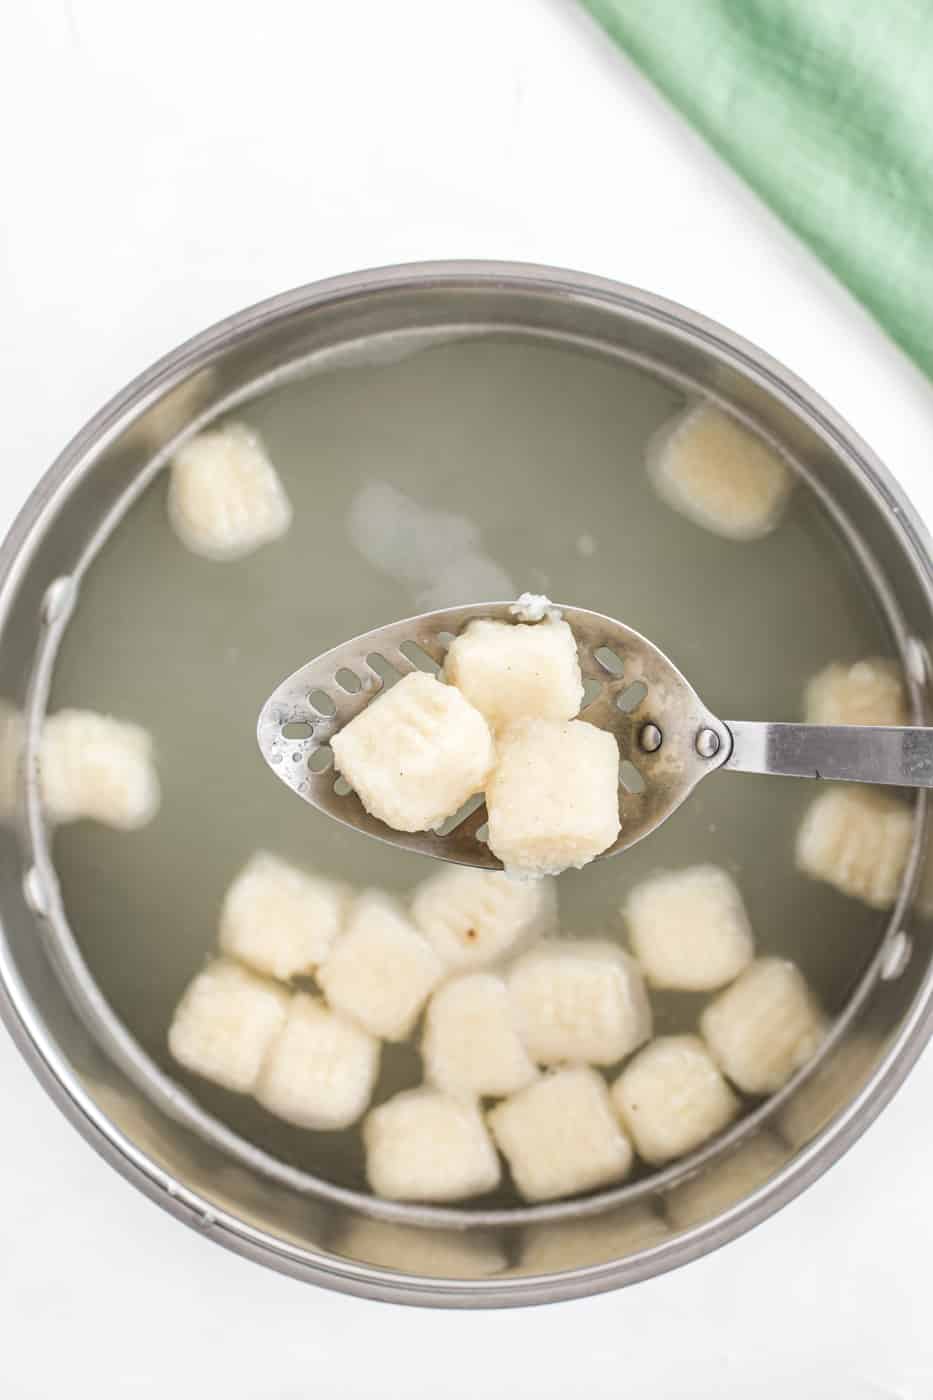 homemade gluten-free gnocchi boiled in water